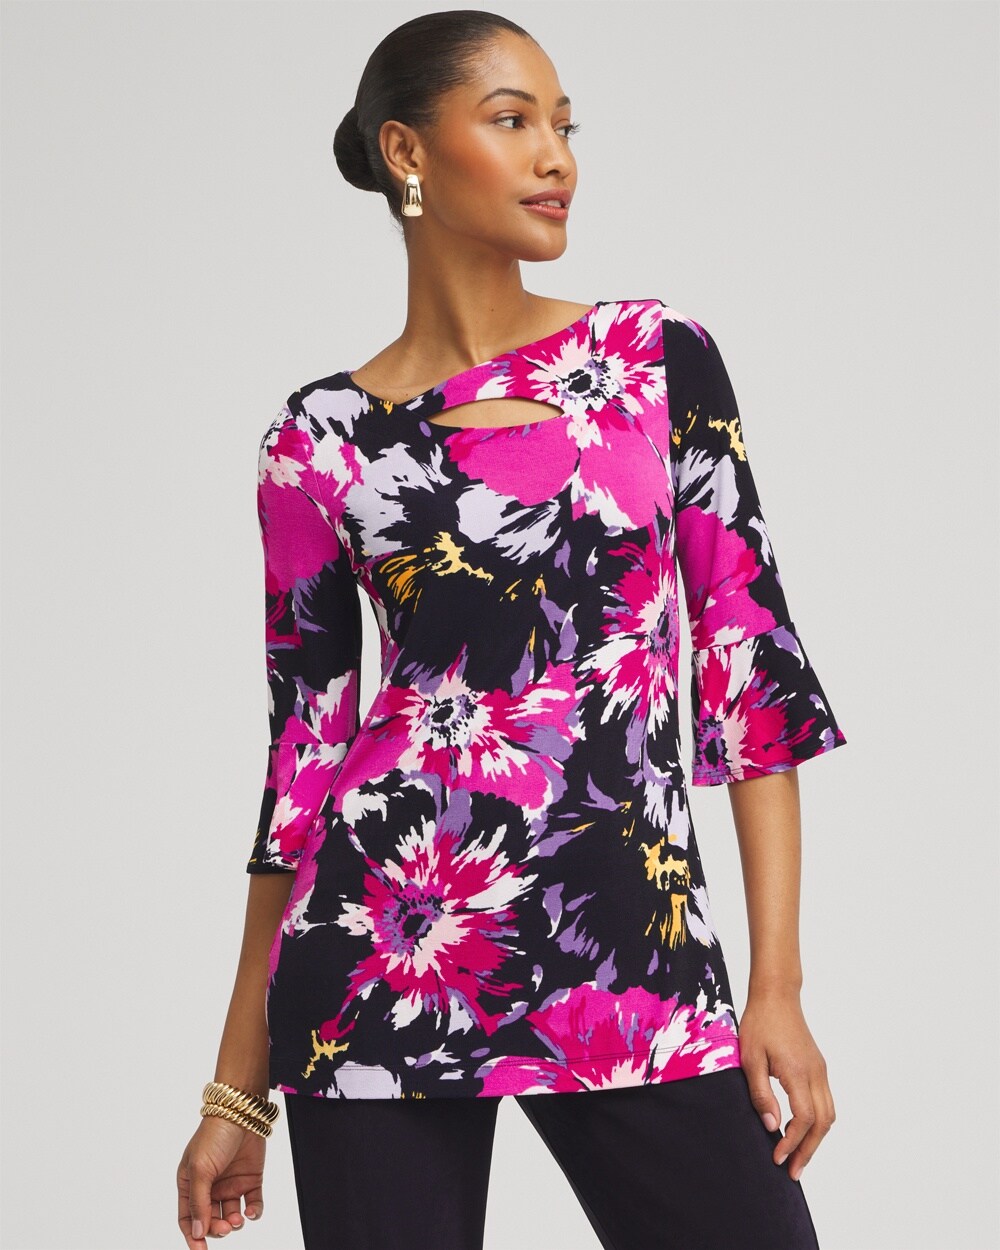 Travelers™ Floral Keyhole Top